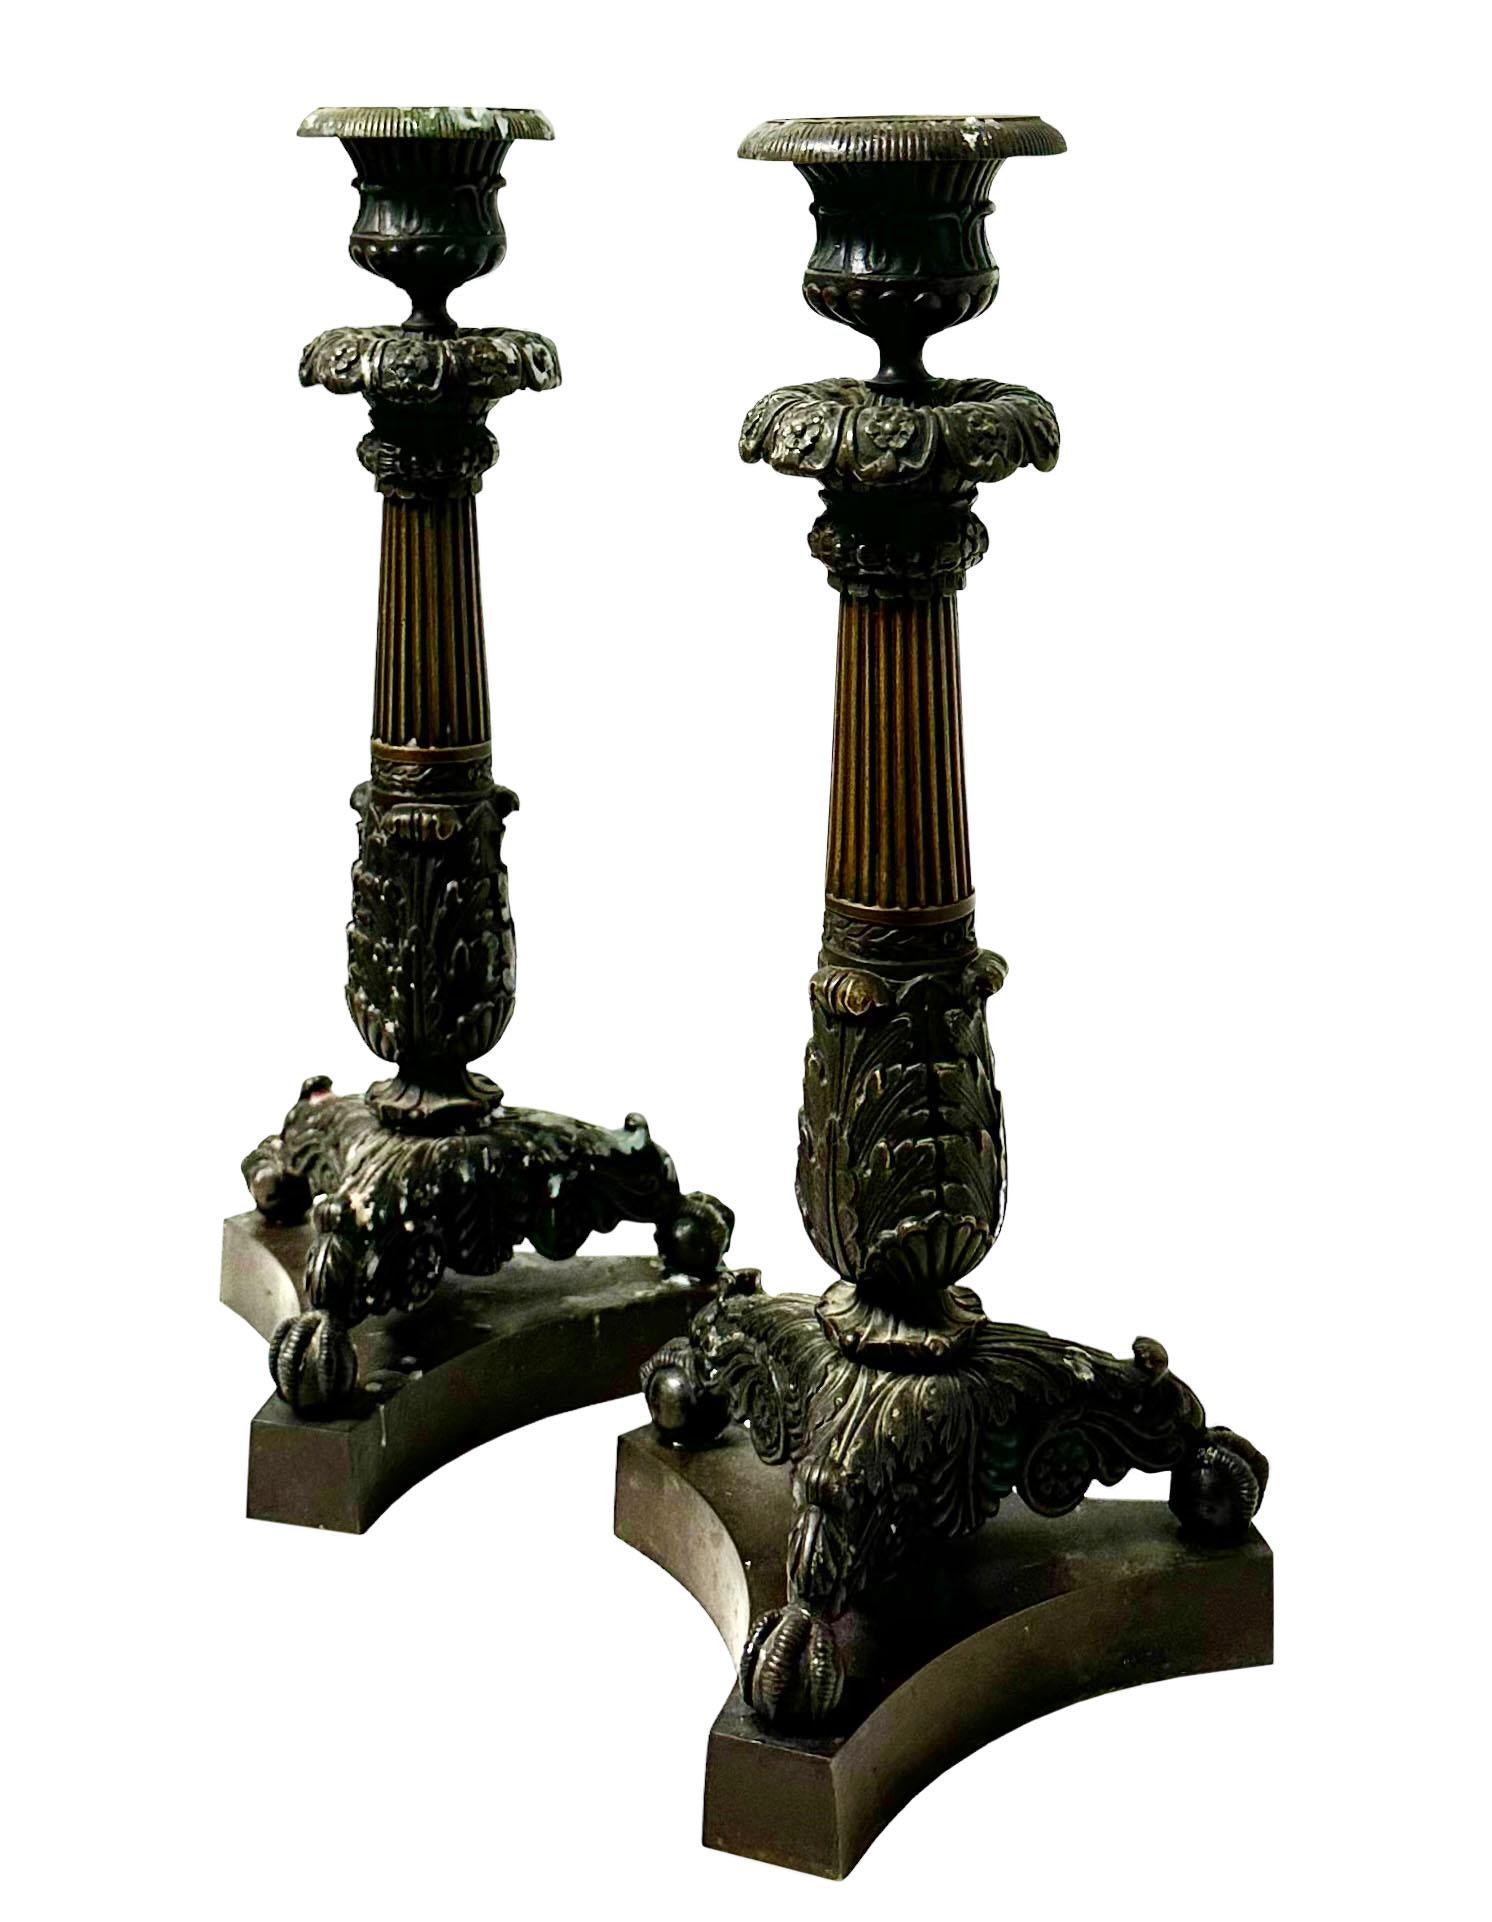 A pair of solid bronze French early empire candlesticks with original dark patina. They are in very good condition, original bow bashes. The only thing it is missing is a block of wood under one of them which probably somebody took off to see how